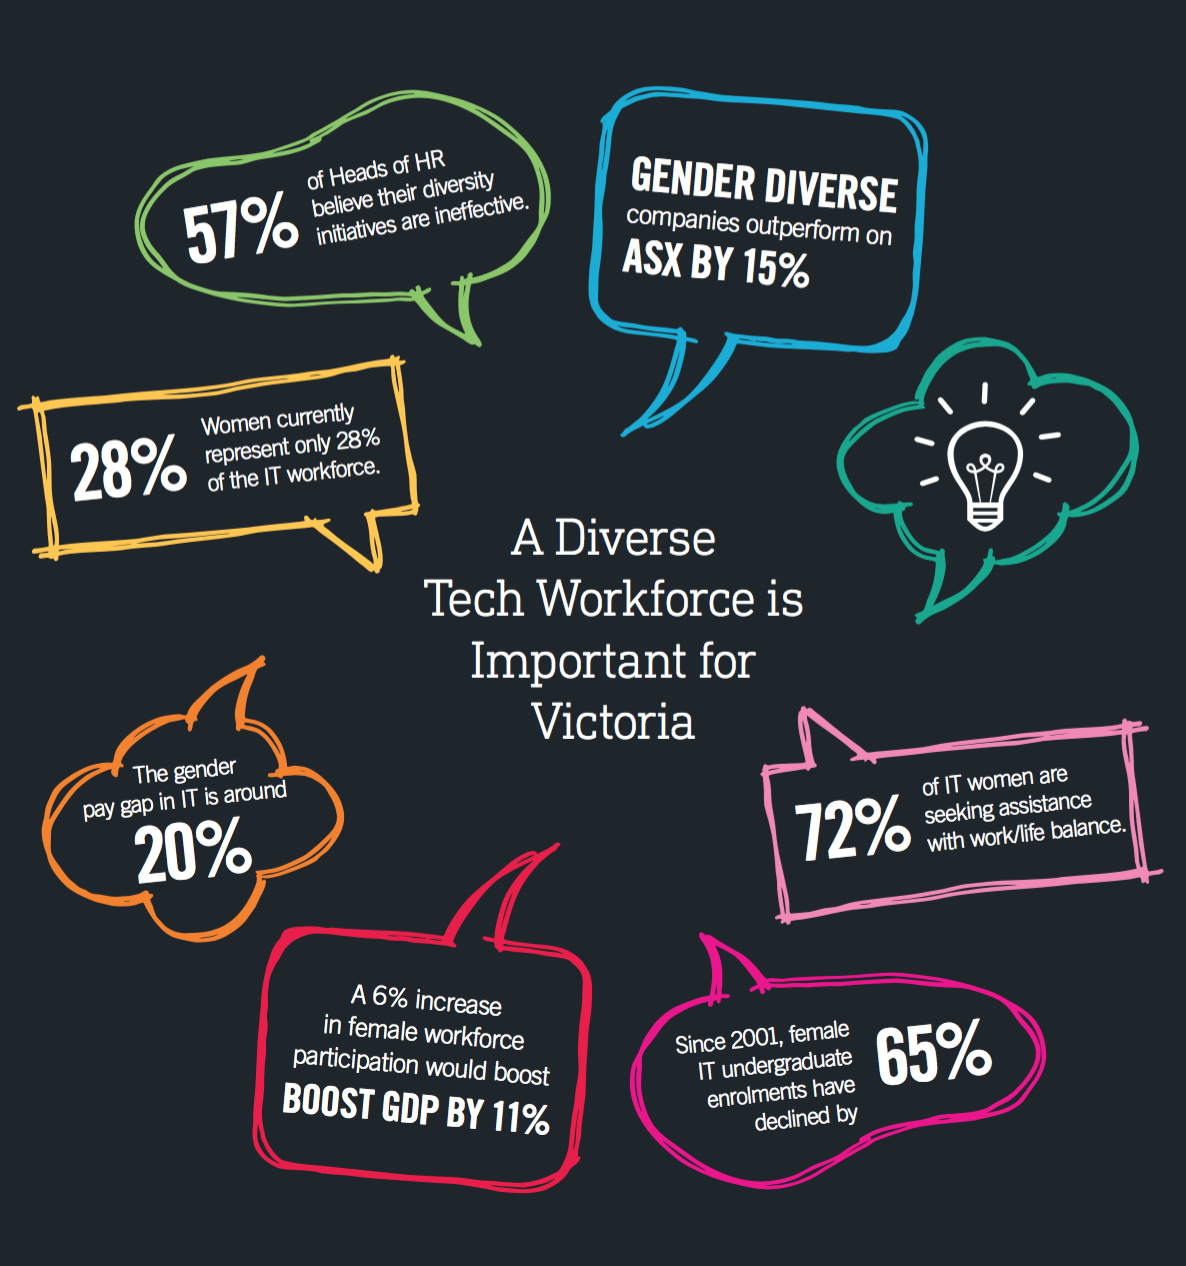 A Diverse Tech Workforce is Important for Victoria